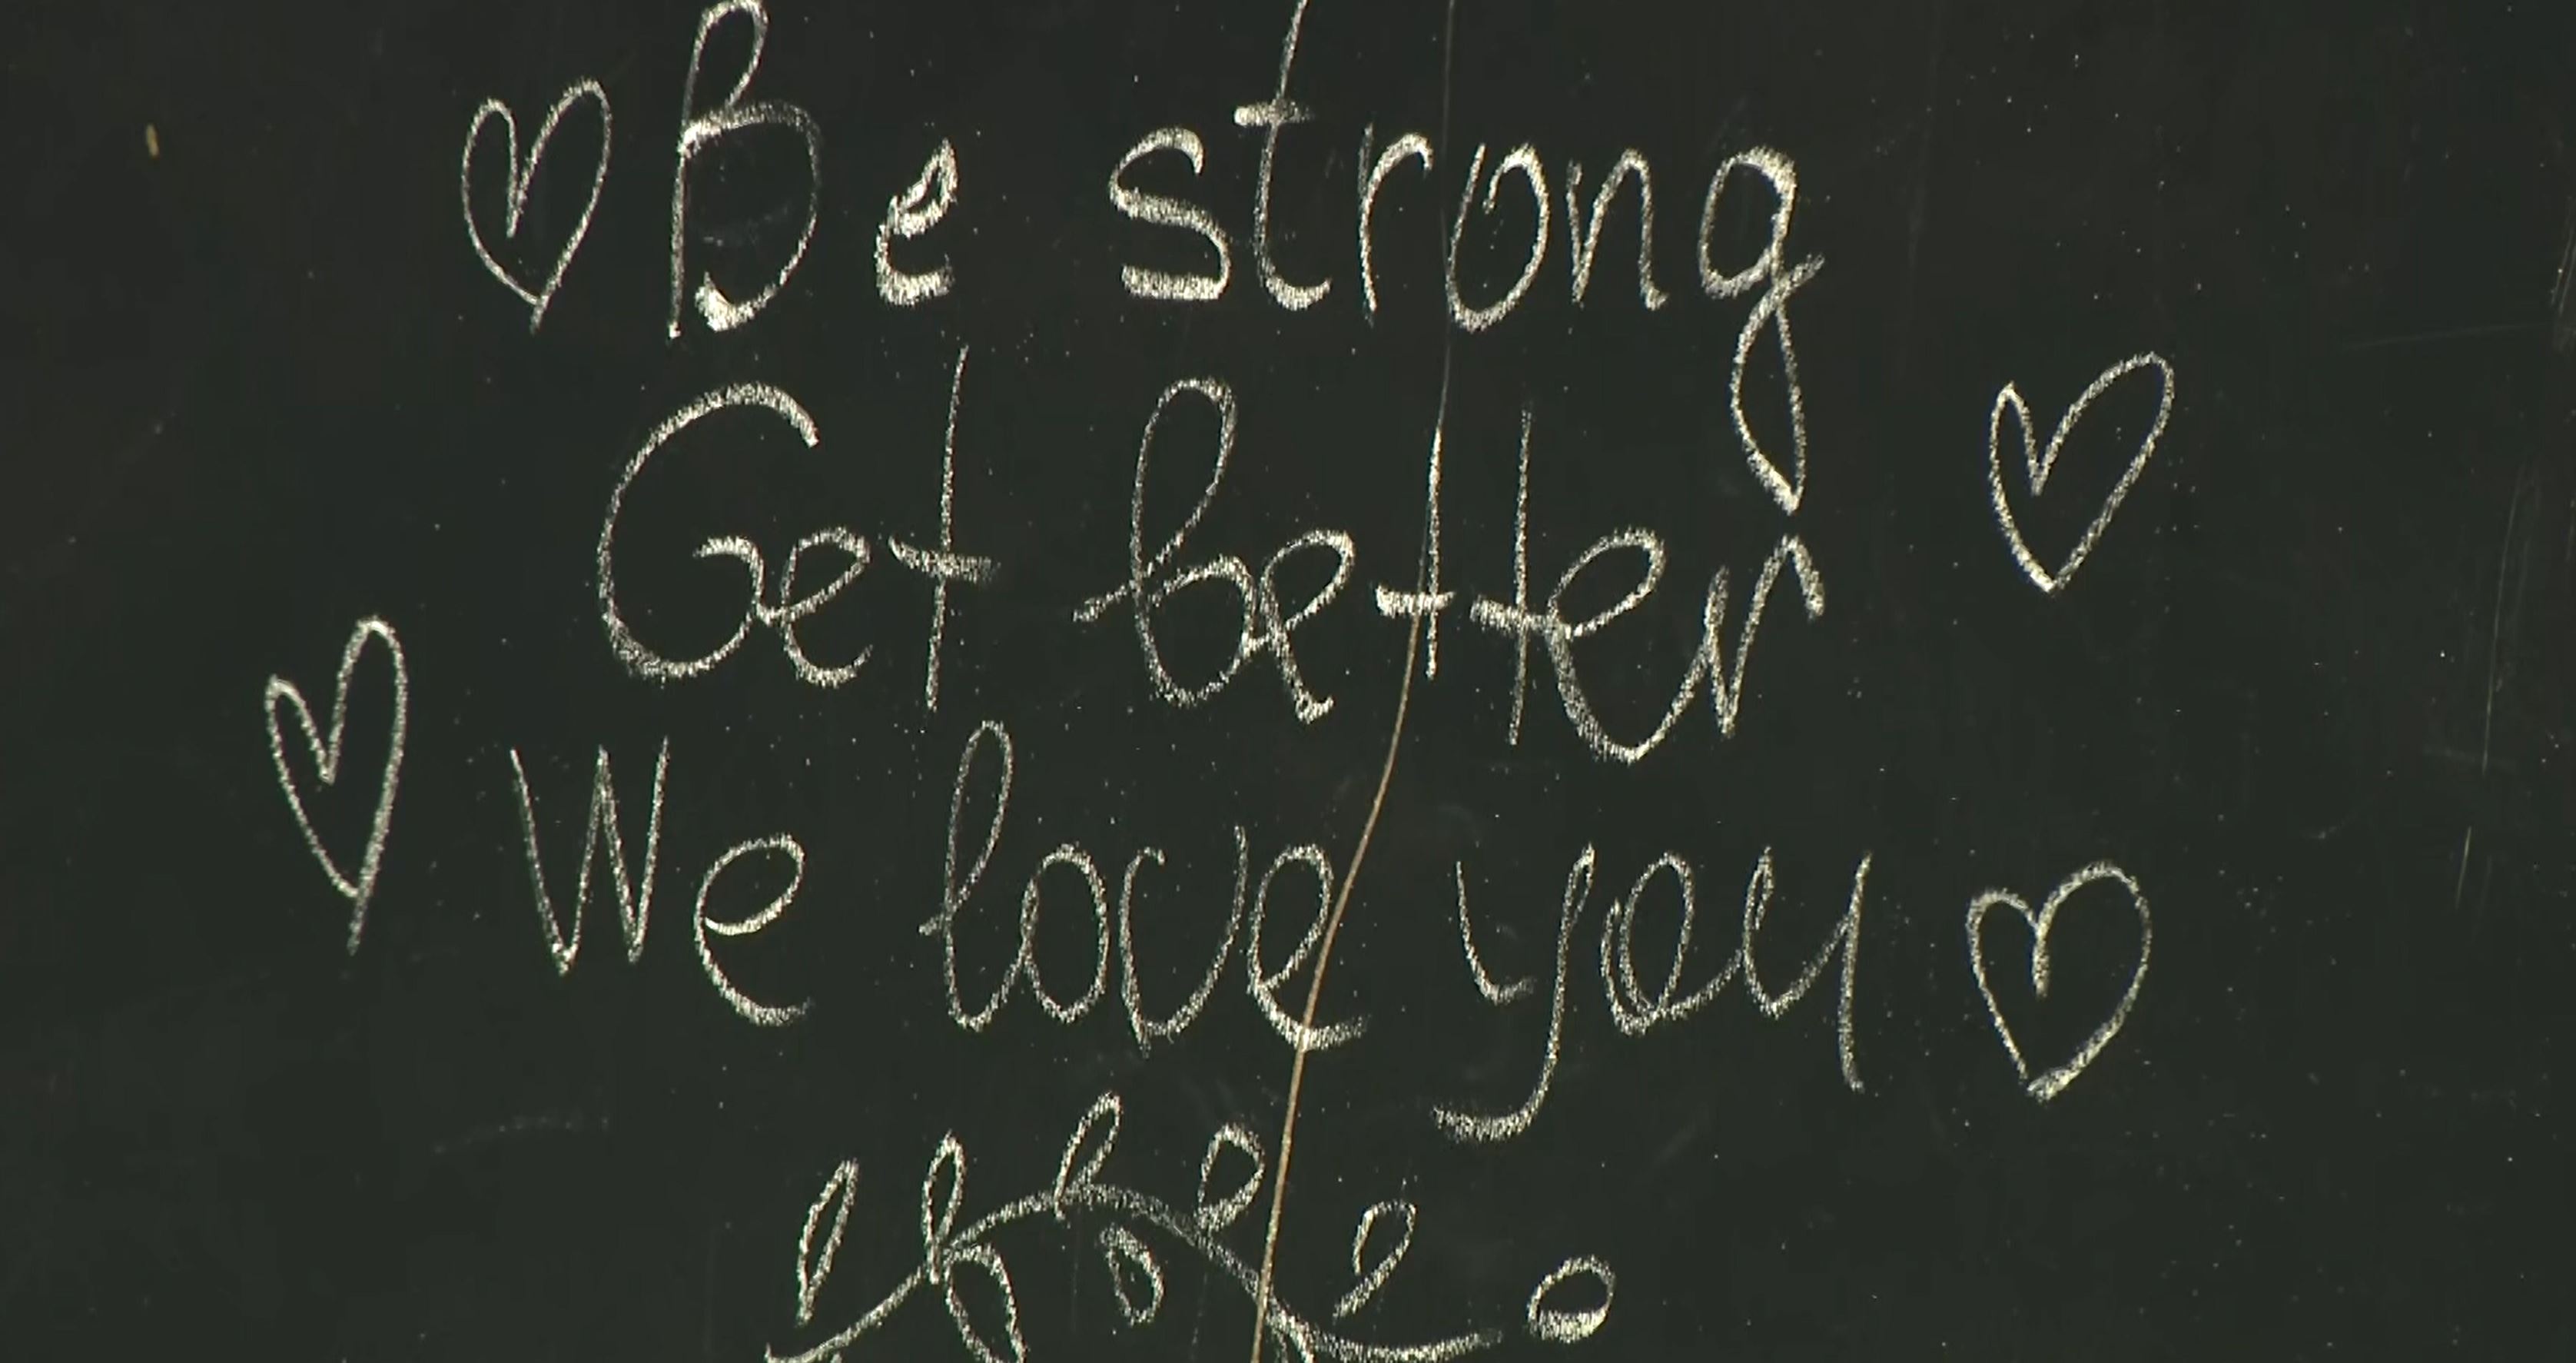 San Jose Shooting: Chalkboards Spring Up Filled With Messages Of Love For VTA Victims - CBS San Francisco